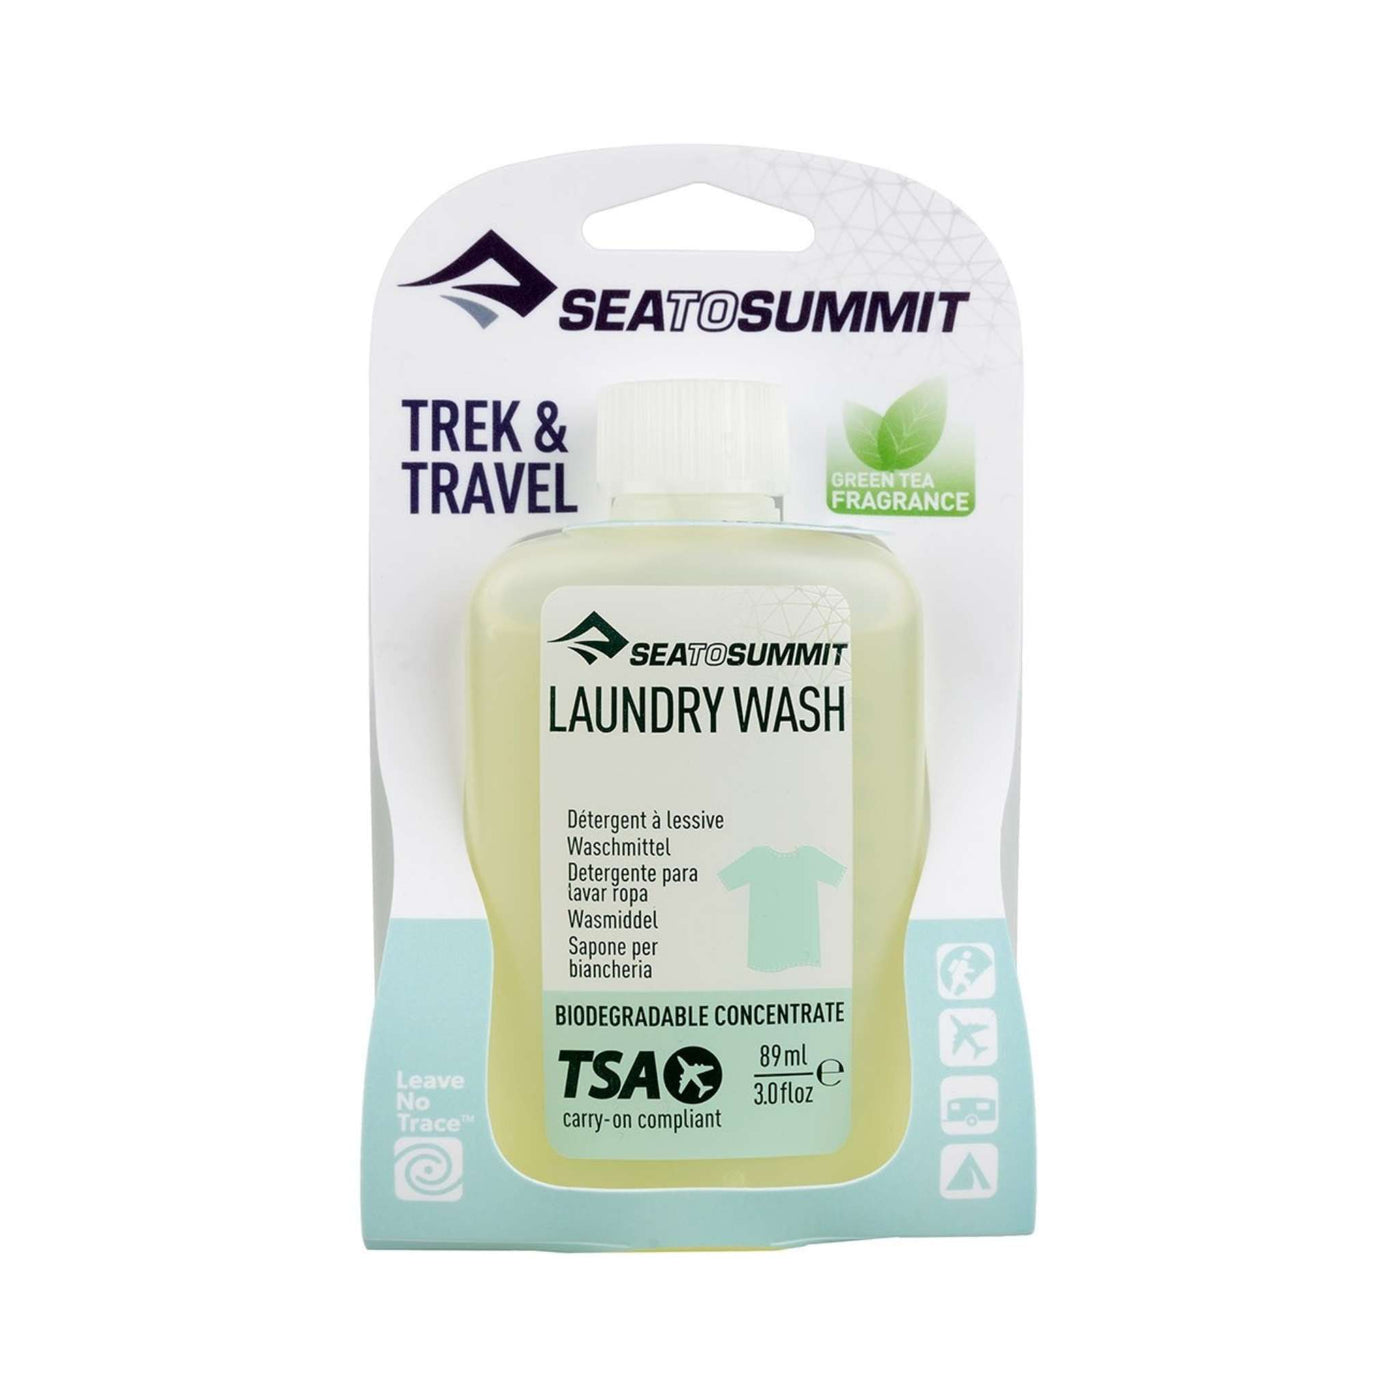 Sea to Summit Liquid Laundry Wash - 89ml | Backcountry Hygiene and Travel Accessories | Further Faster Christchurch NZ